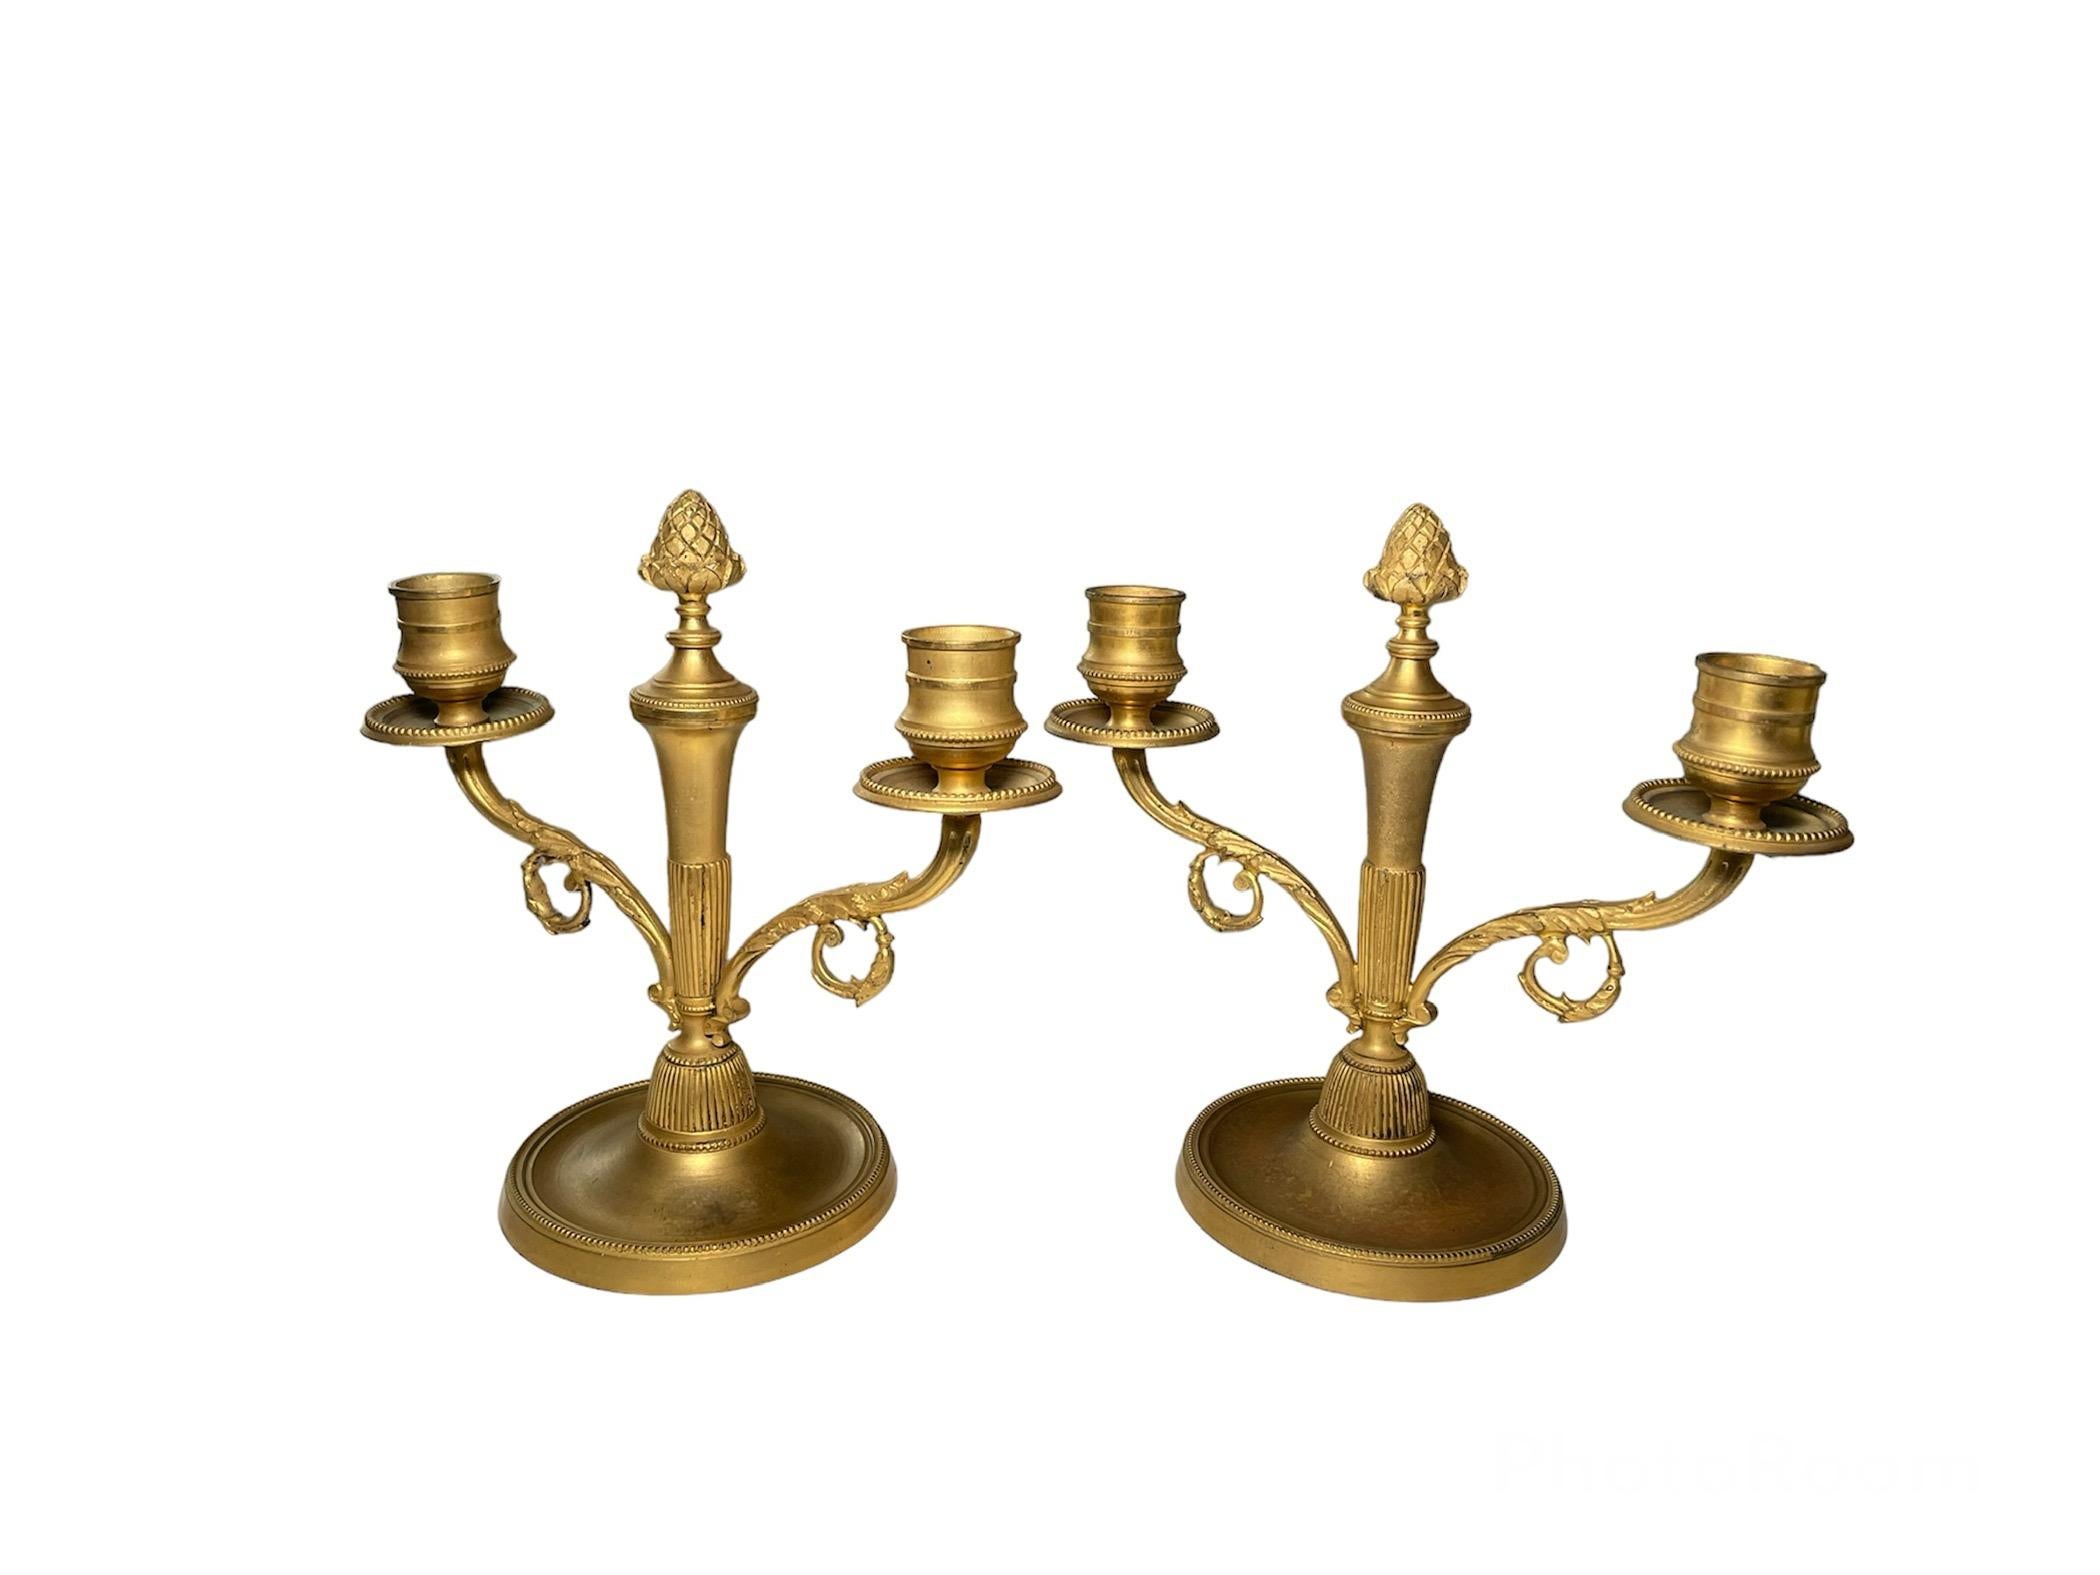 This is a pair of gilt bronzed metal double candle holders. They depict double candle holders decorated with some scrolls of acanthus leaves in their branches and pine cones in the center of them serve as a finial. They stand over round bronze metal